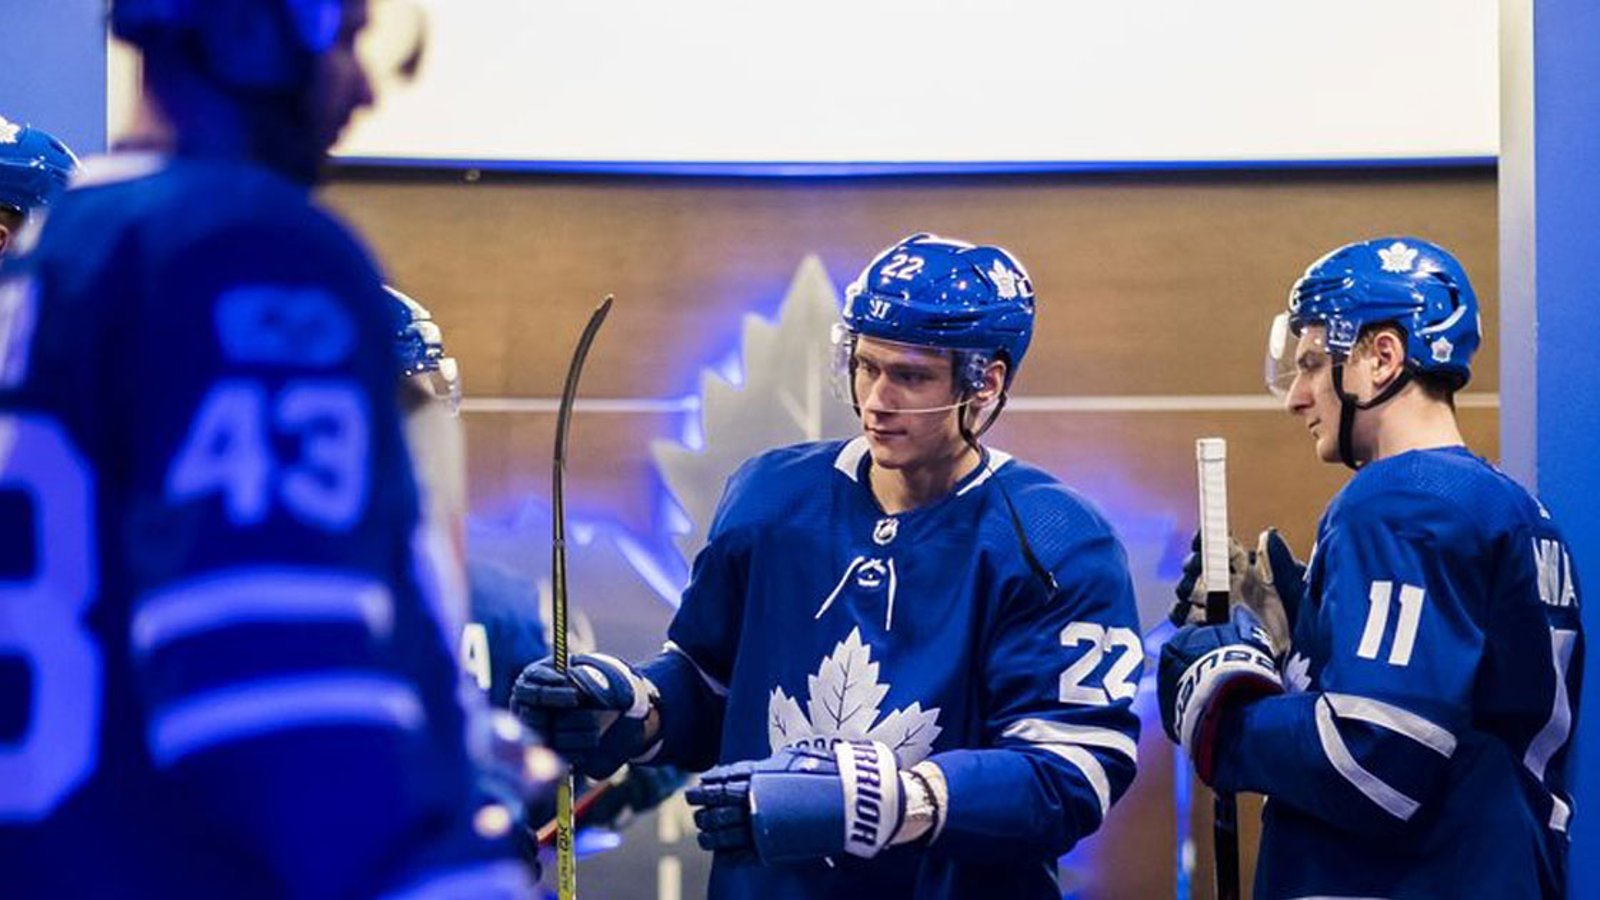 McKenzie reports on a potentially huge offseason trade for the Leafs!